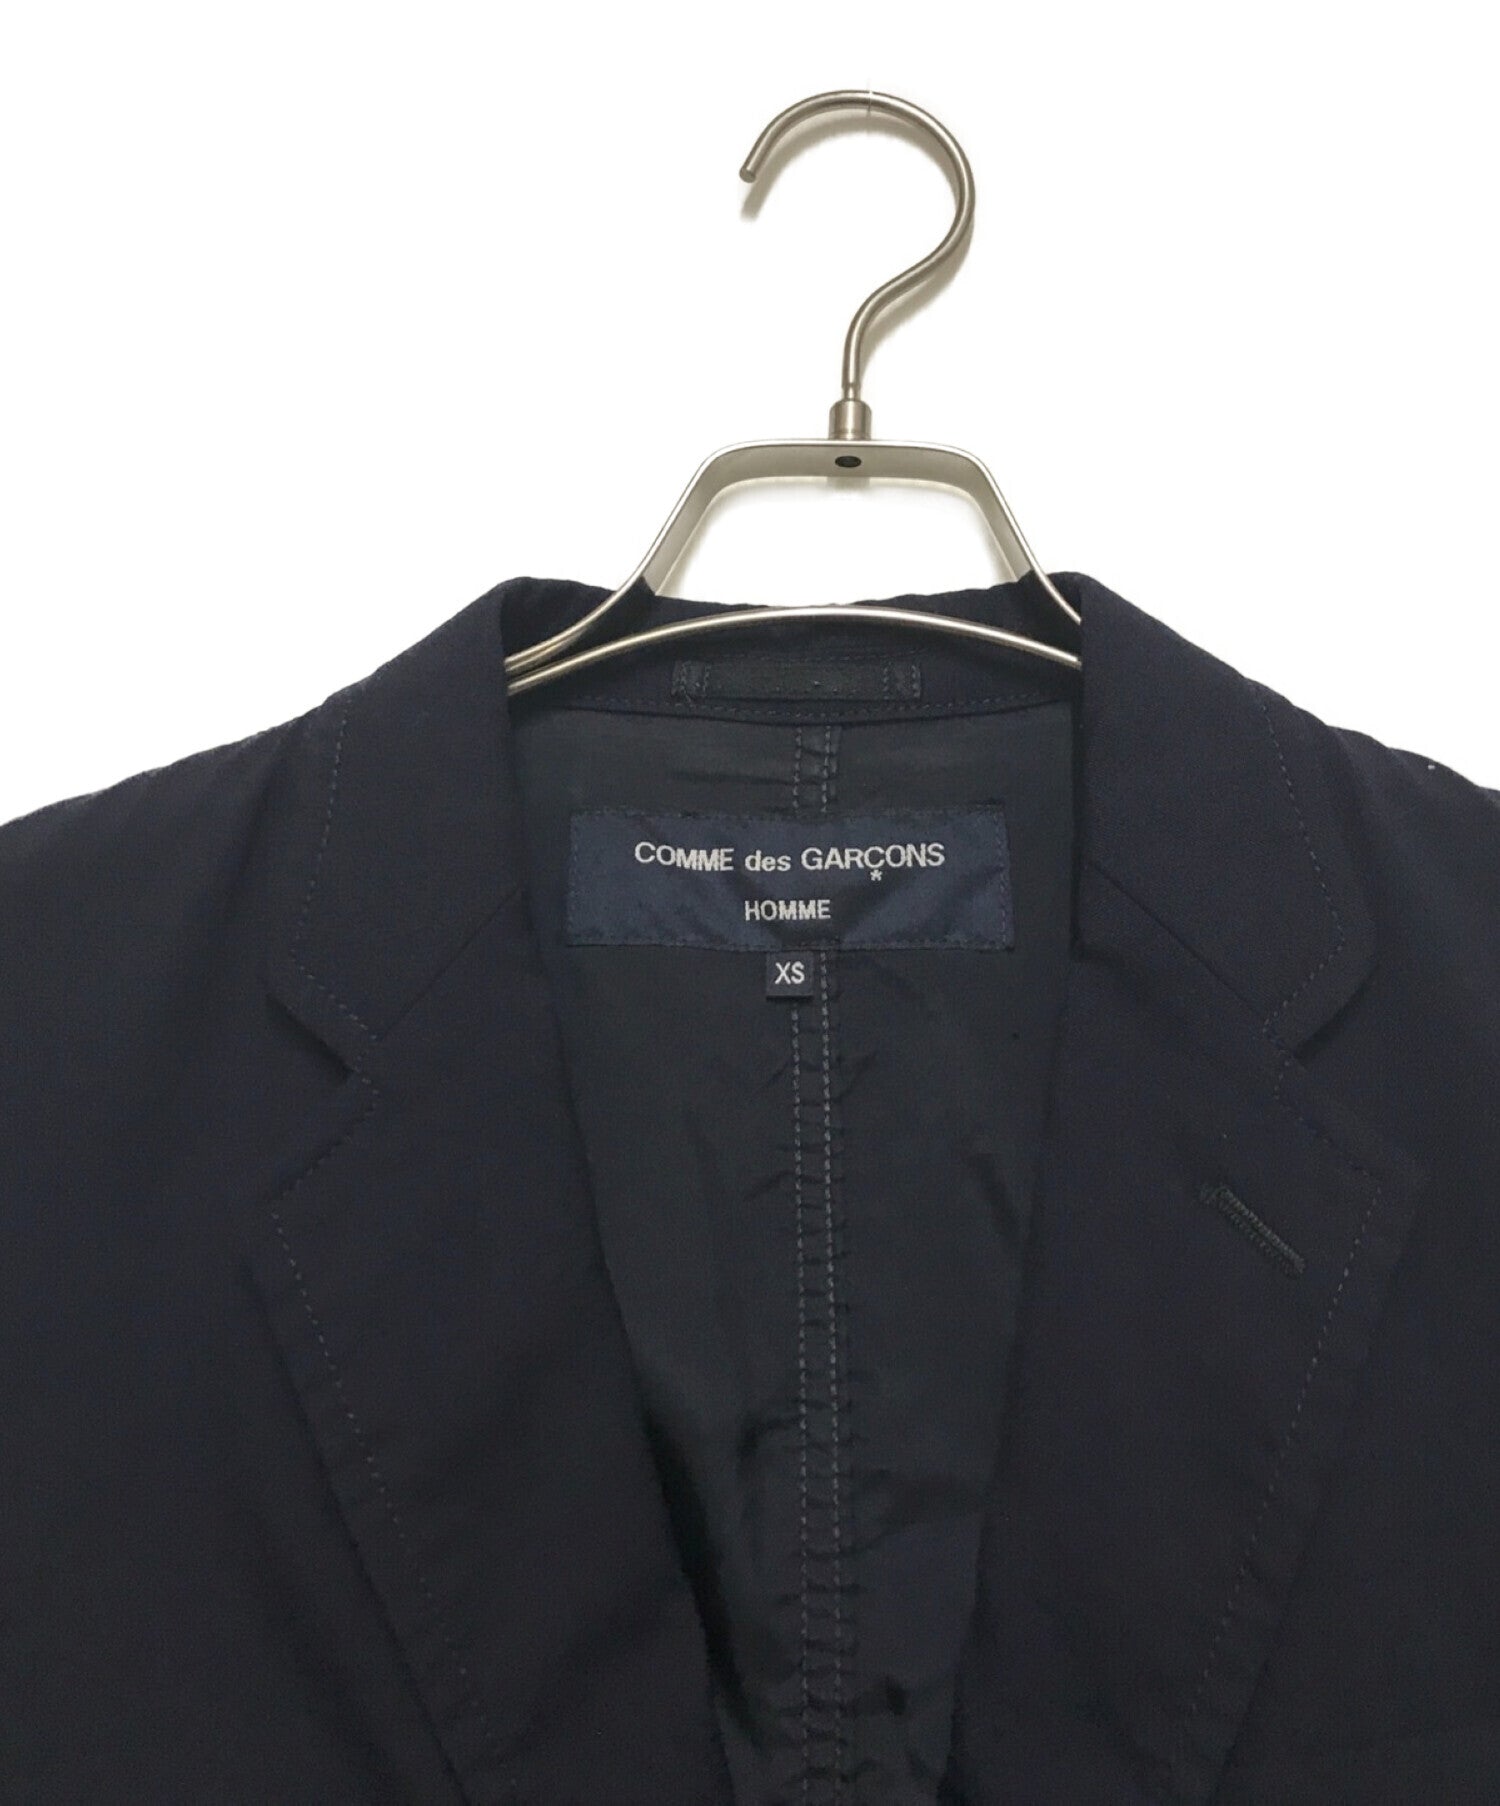 COMME des GARCONS HOMME Wool Toro Packering Tailored Jacket HS-J101